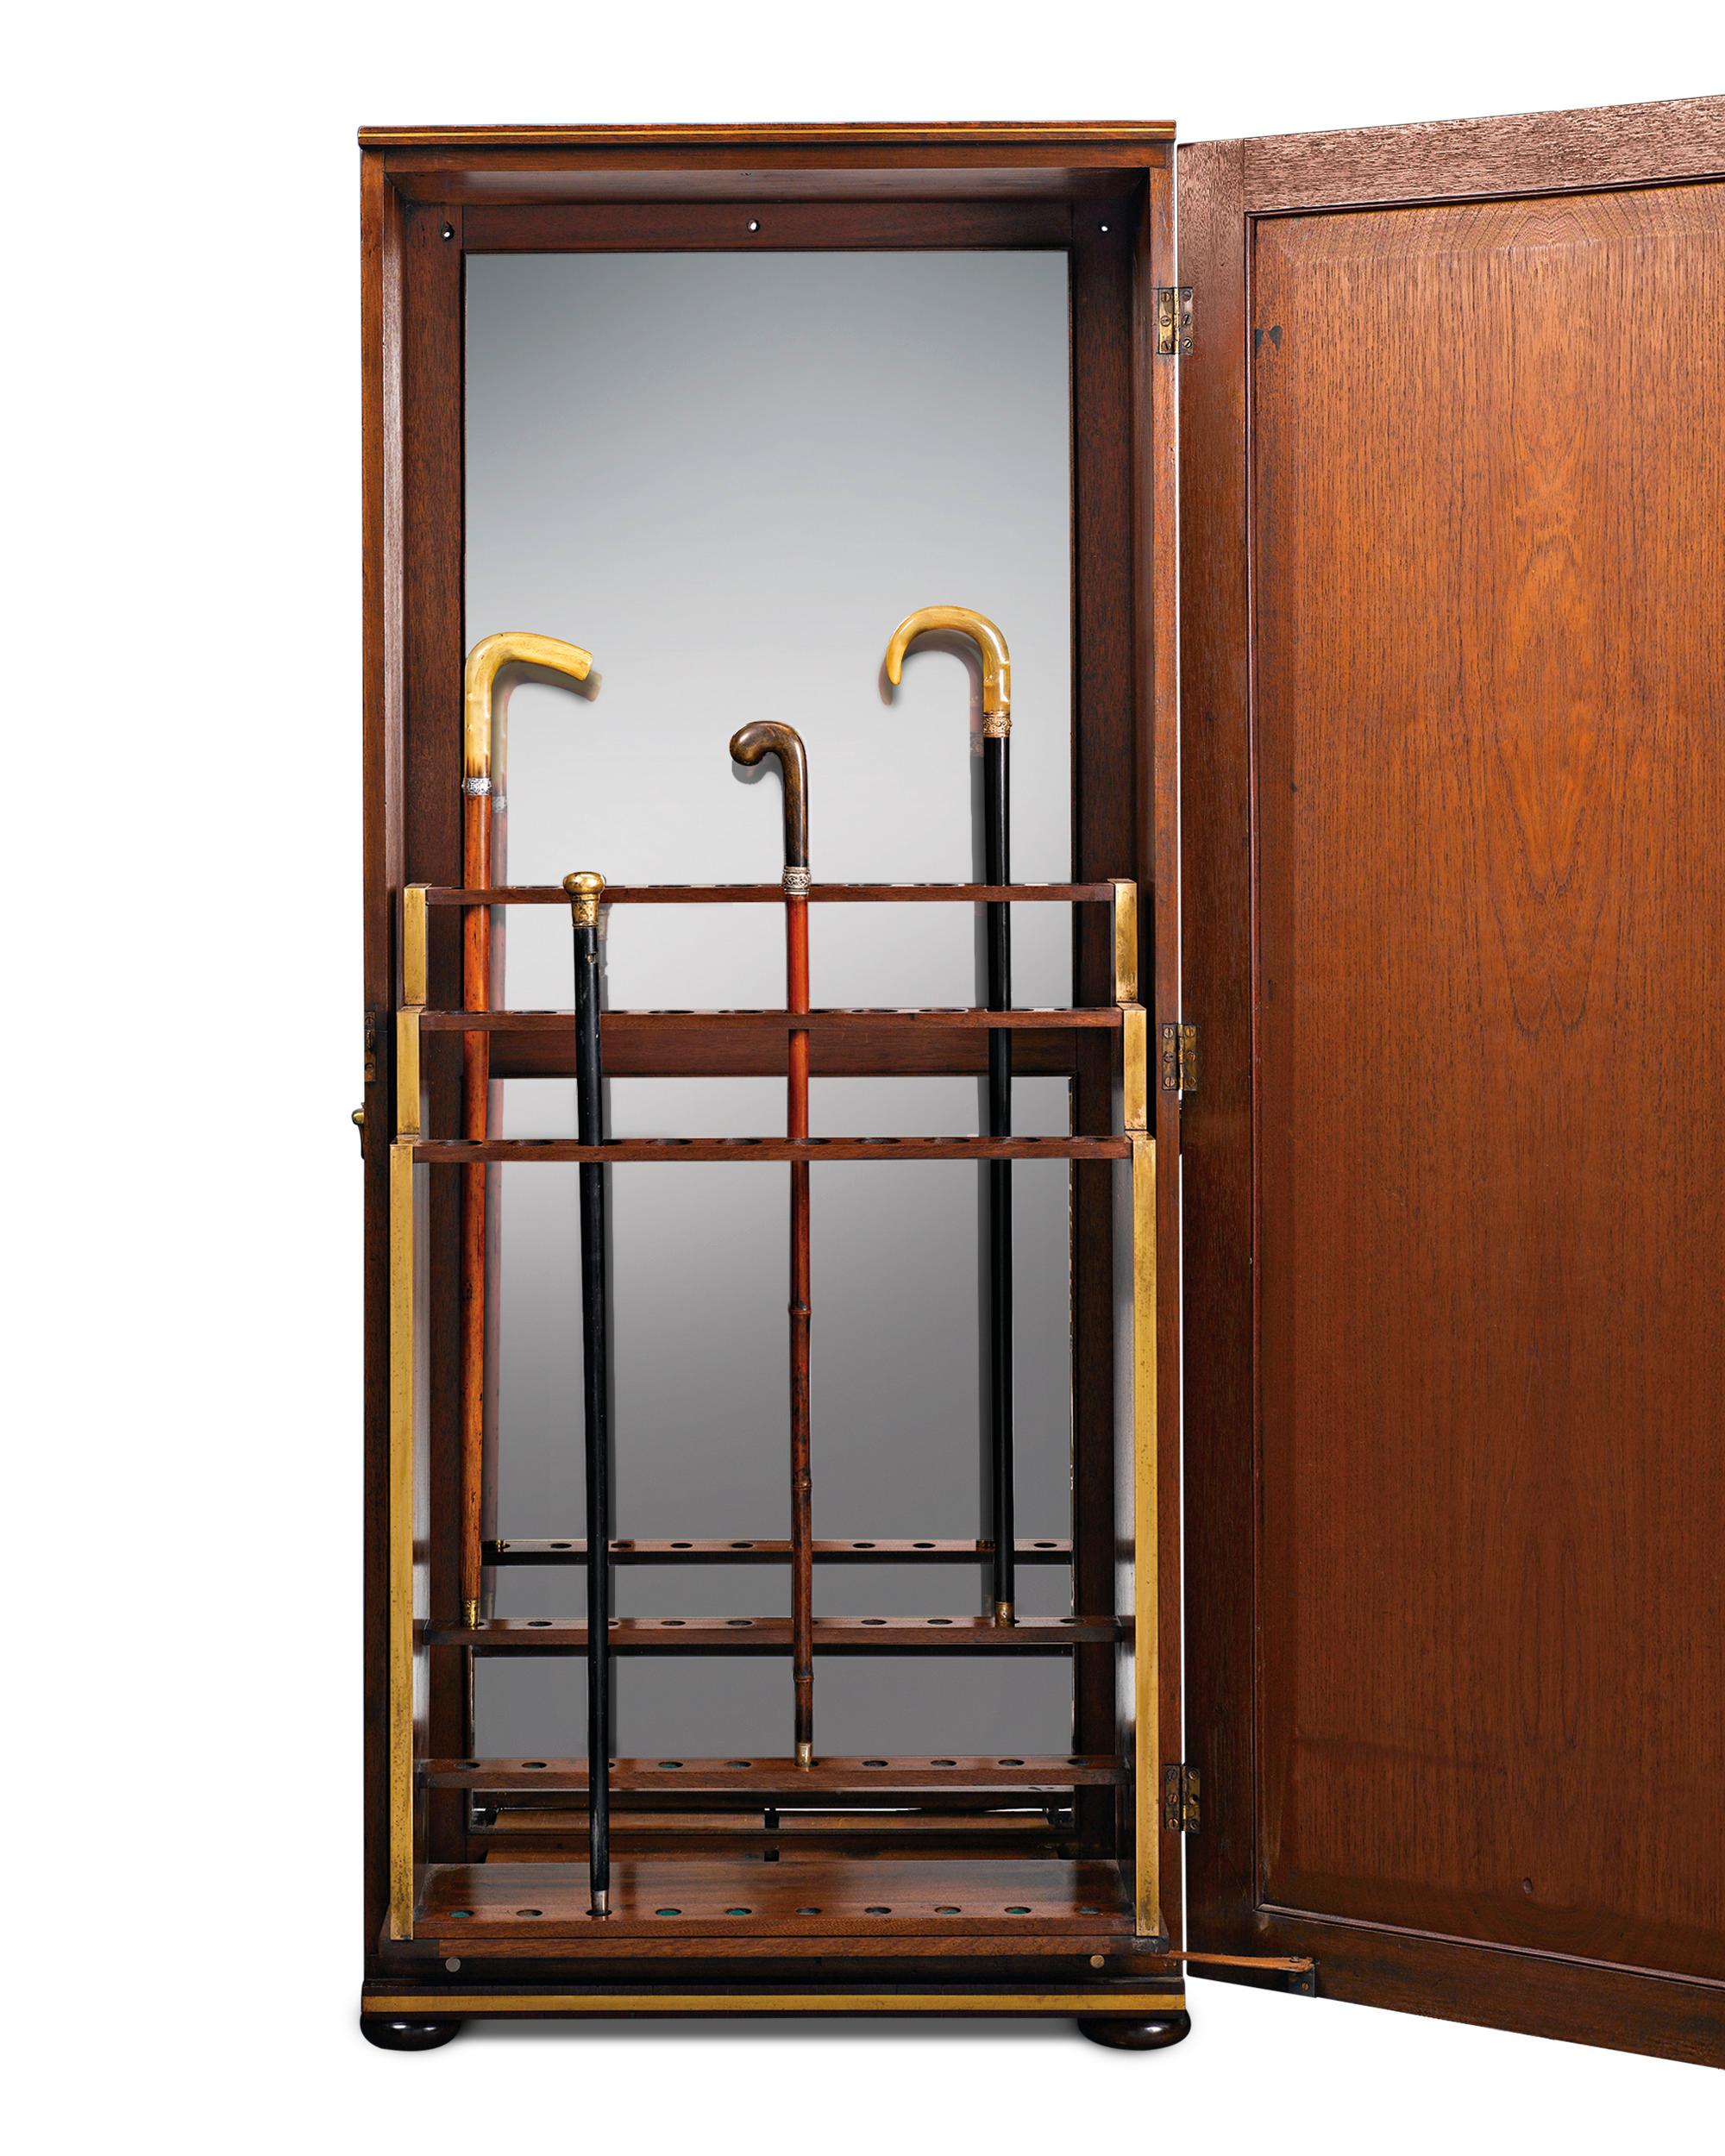 Classical style and impeccable design distinguish this English upright cane cabinet. Crafted of lustrous Cuban mahogany, this case is comprised of a beautifully paneled door which opens to reveal a three-tiered cane rack that holds 30 walking